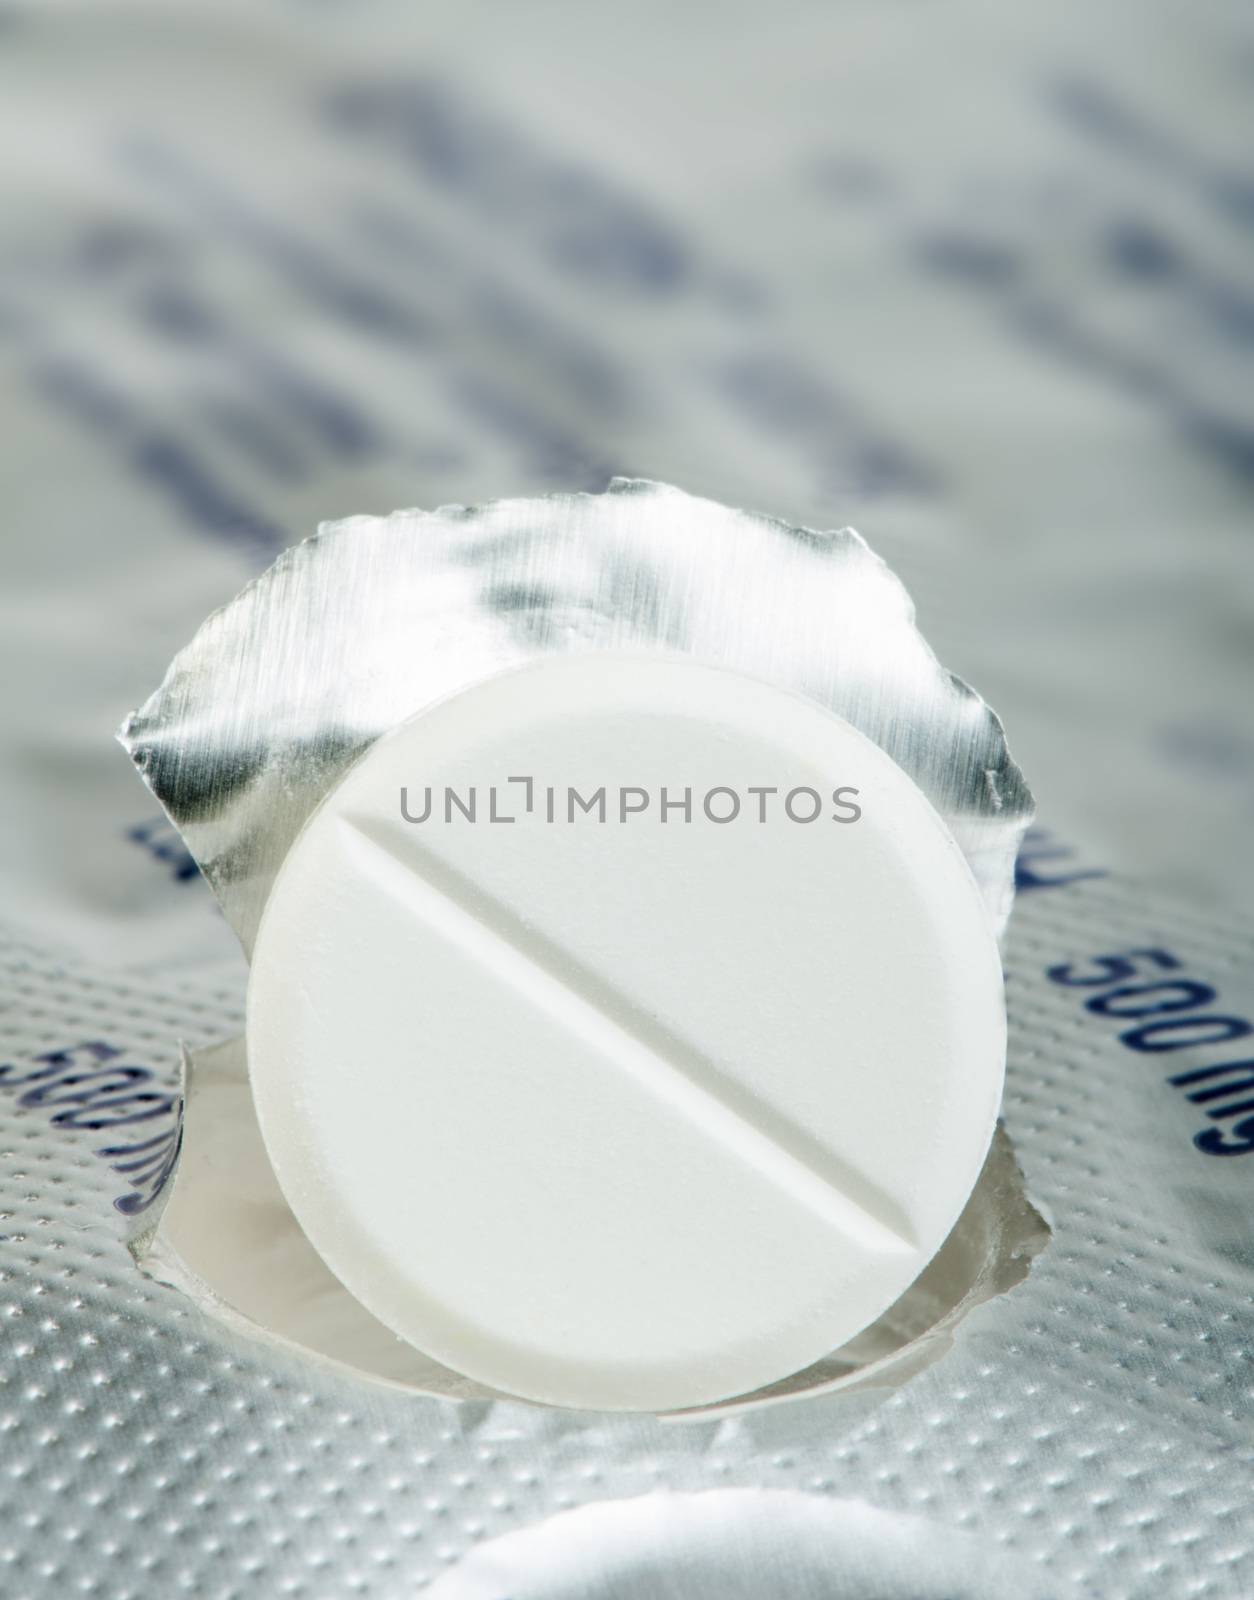 White pill in a pack very close up. Macro studio shot